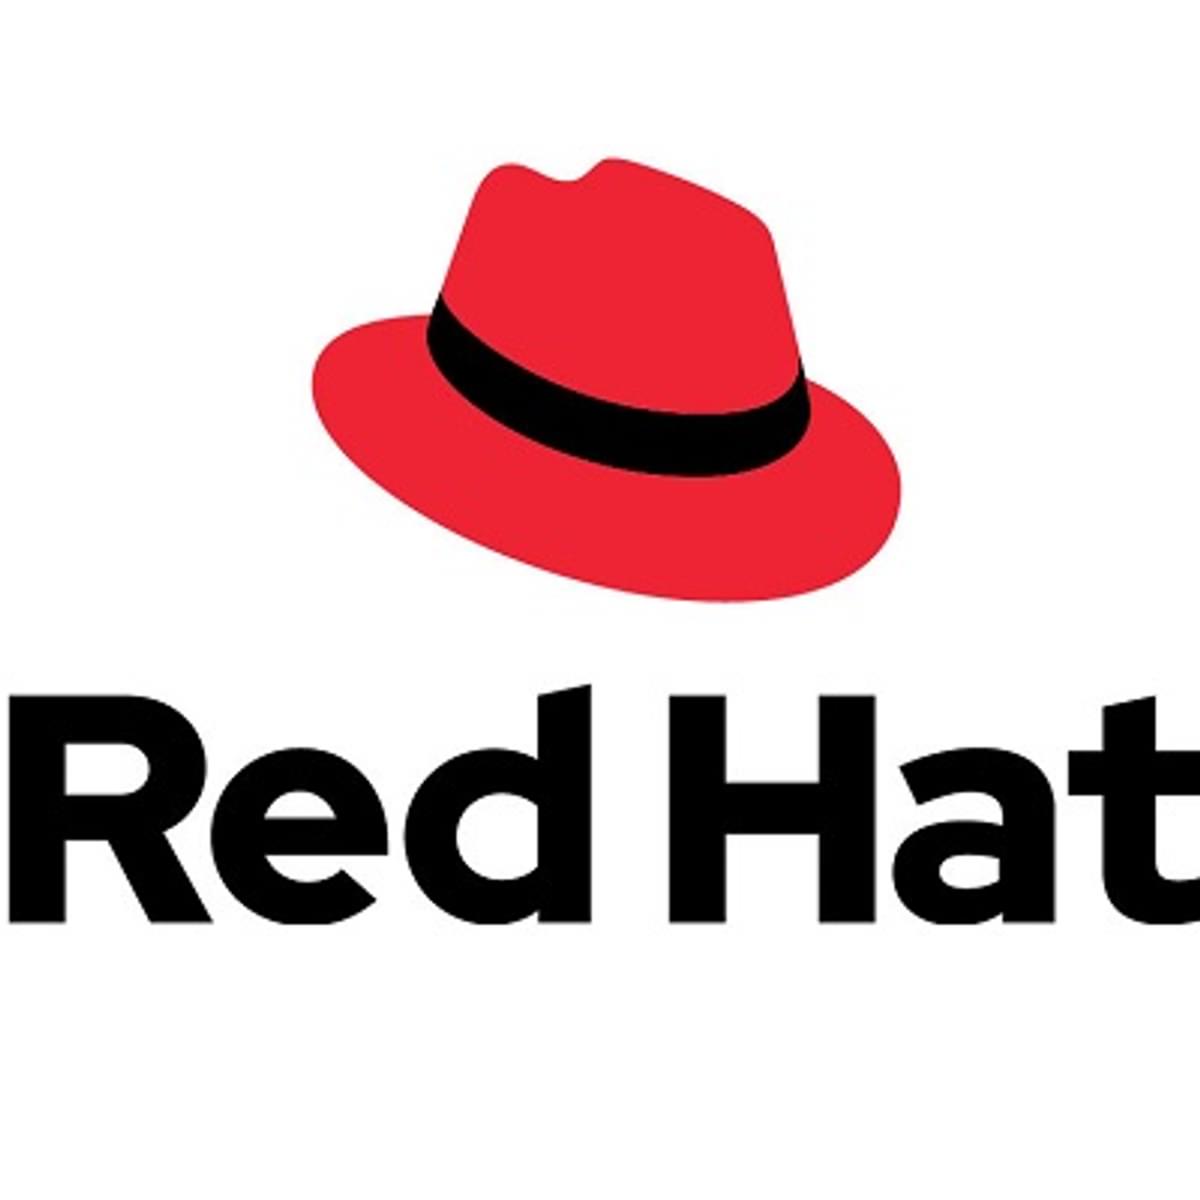 Red Hat neemt Kubernetes security specialist StackRox over image